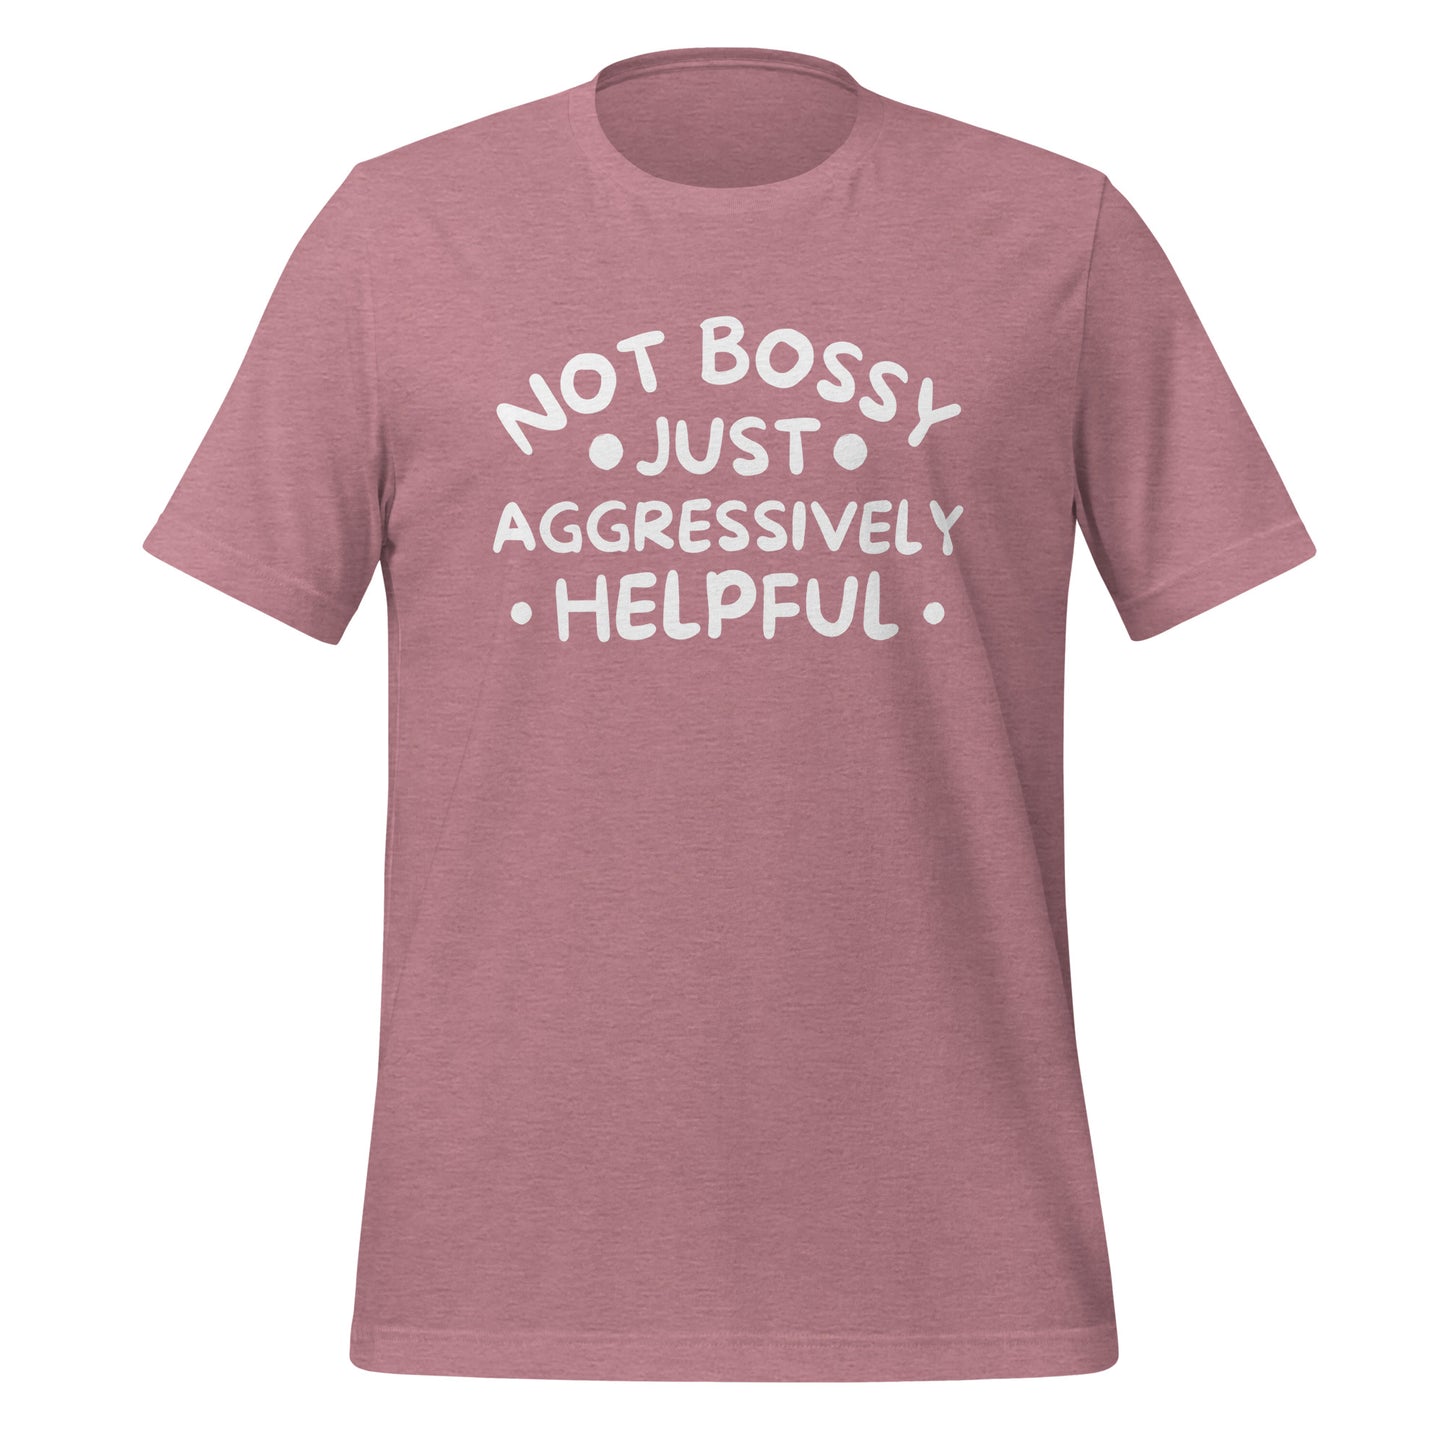 I'm Not Bossy, Just Aggressively Helpful Quality Cotton Bella Canvas Adult T-Shirt